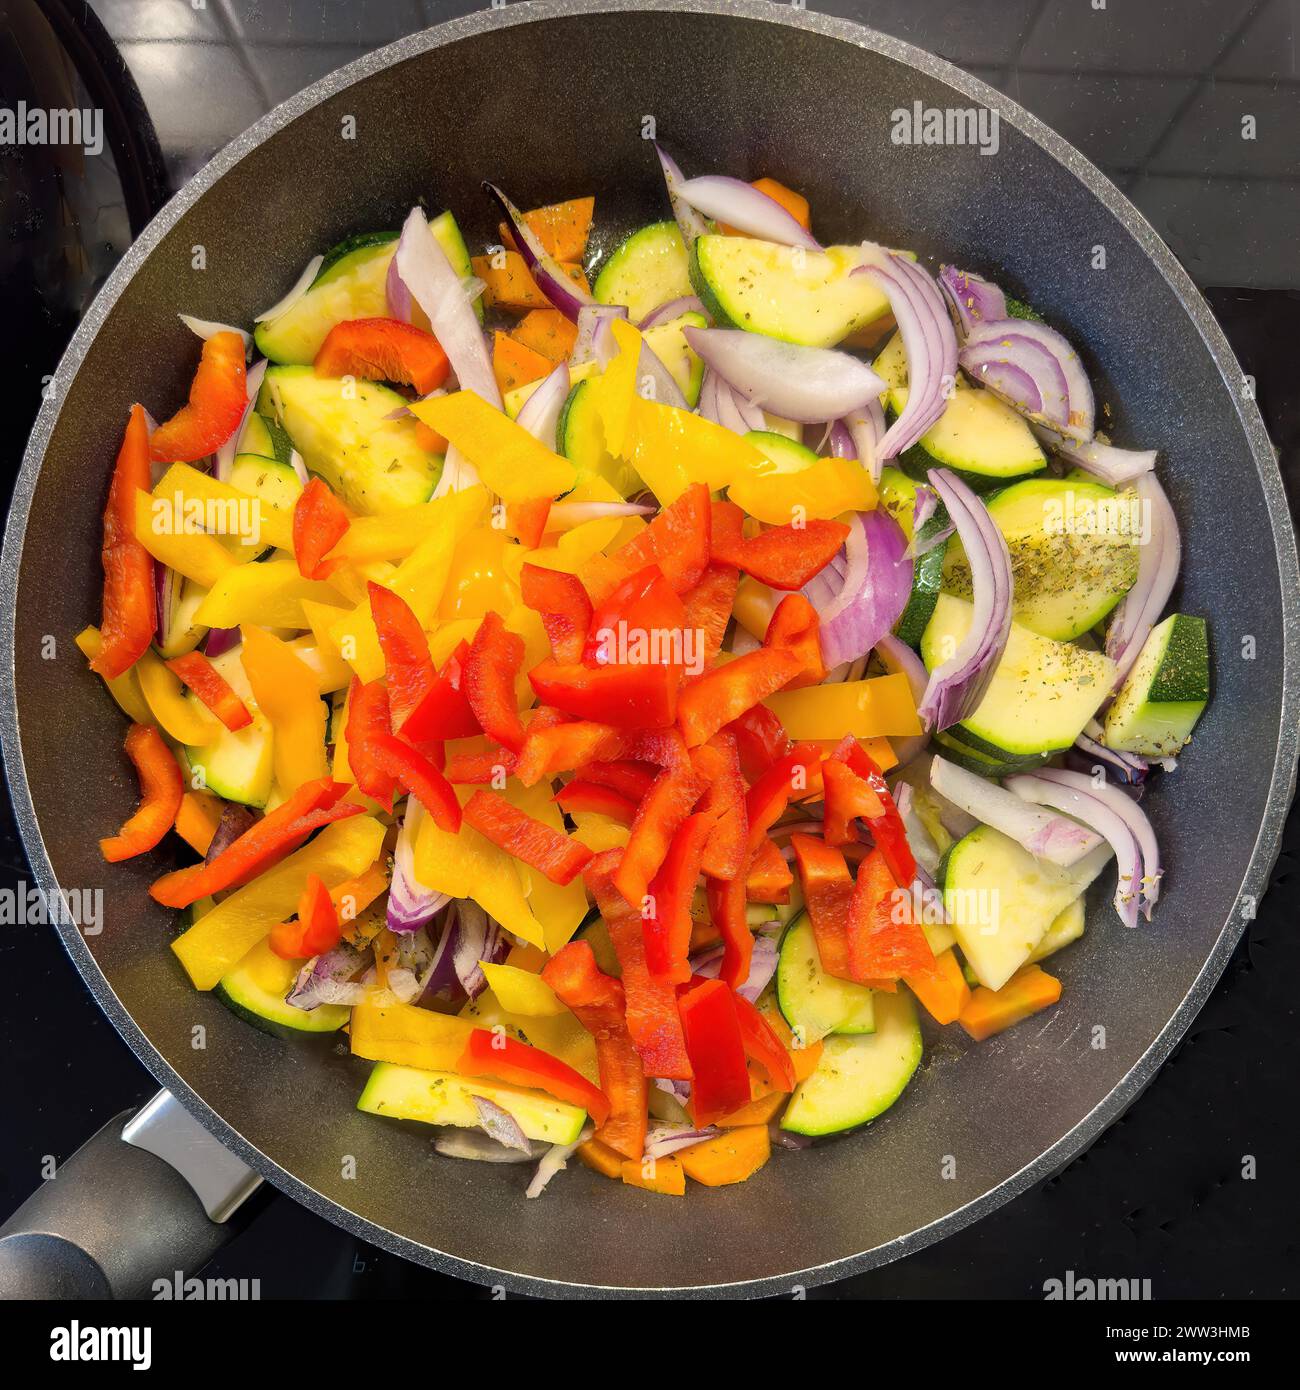 Vegetarian vegan dish Vegetable pan with courgettes red yellow peppers onions vegetable onions carrots carrots Vegetables are sauteed with olive oil Stock Photo